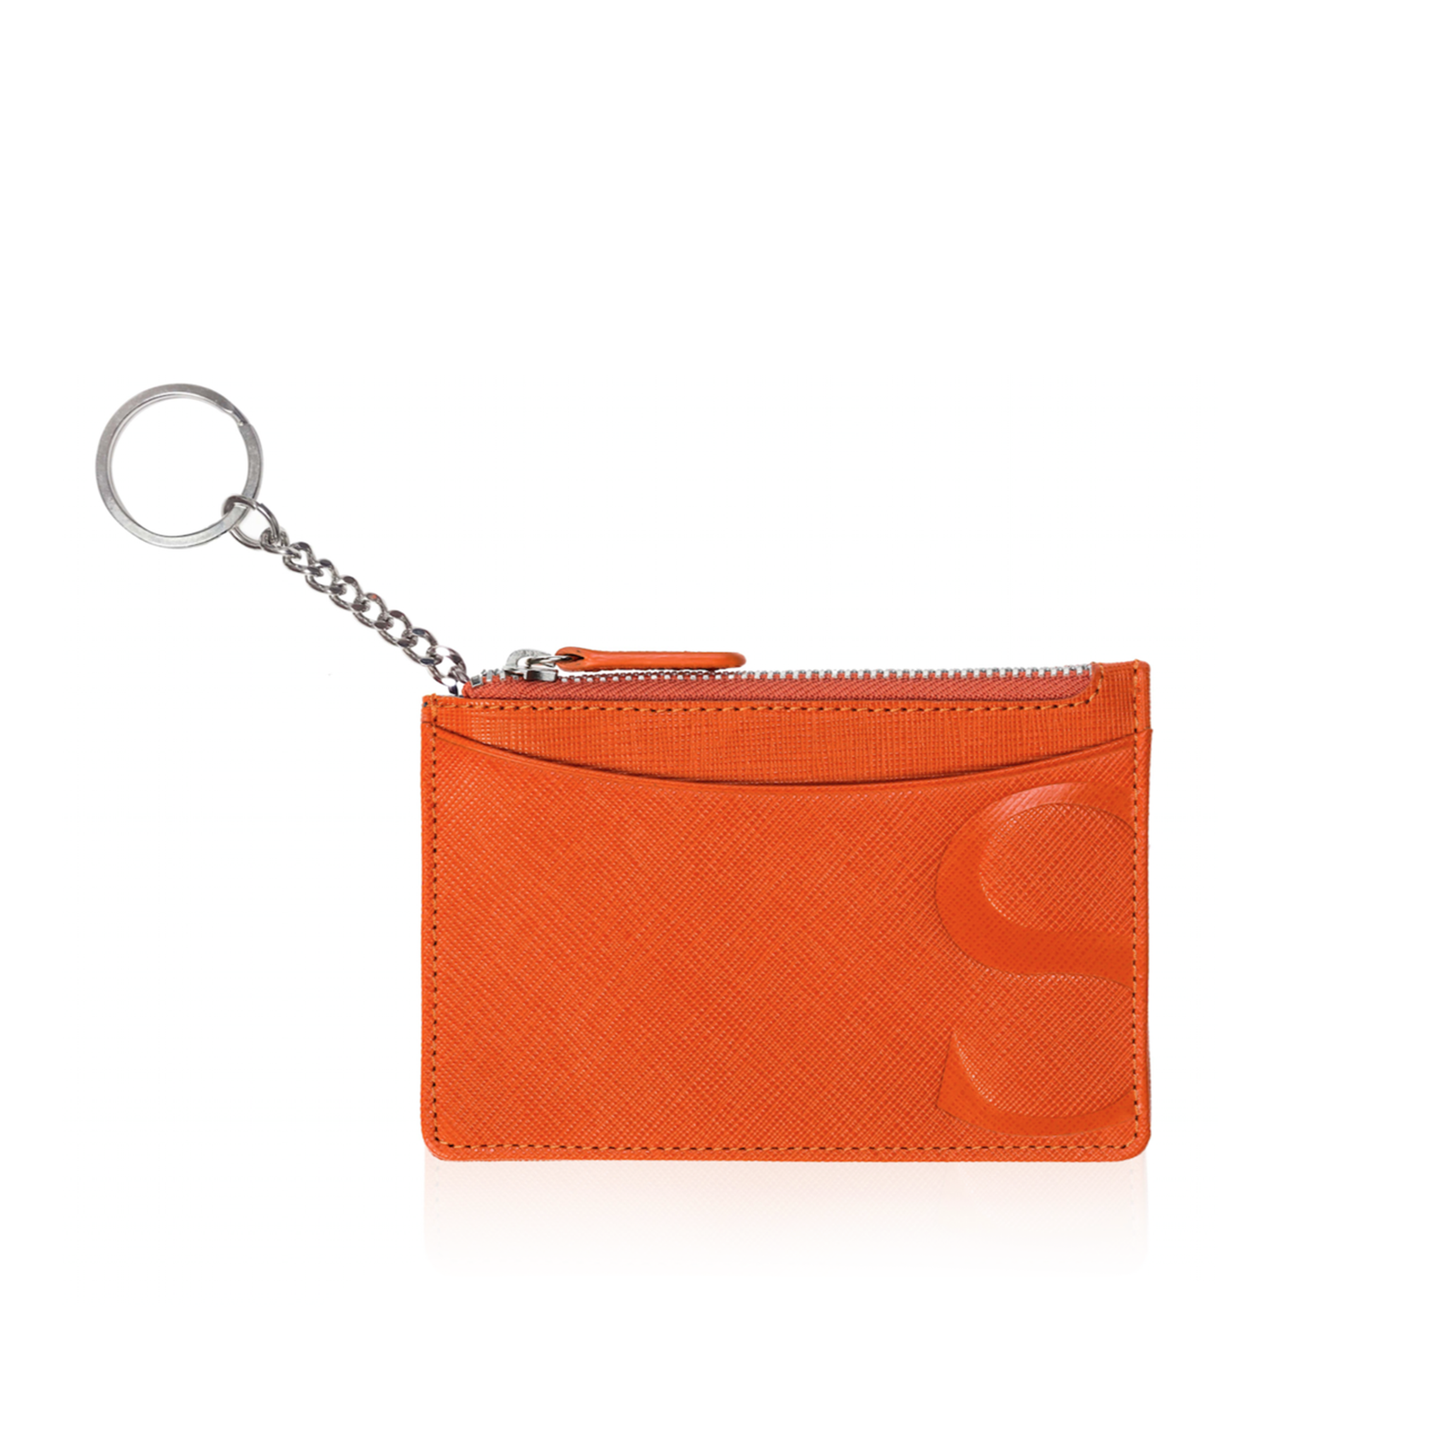 Credit Card Pouch with Keyring in Orange Textured Leather